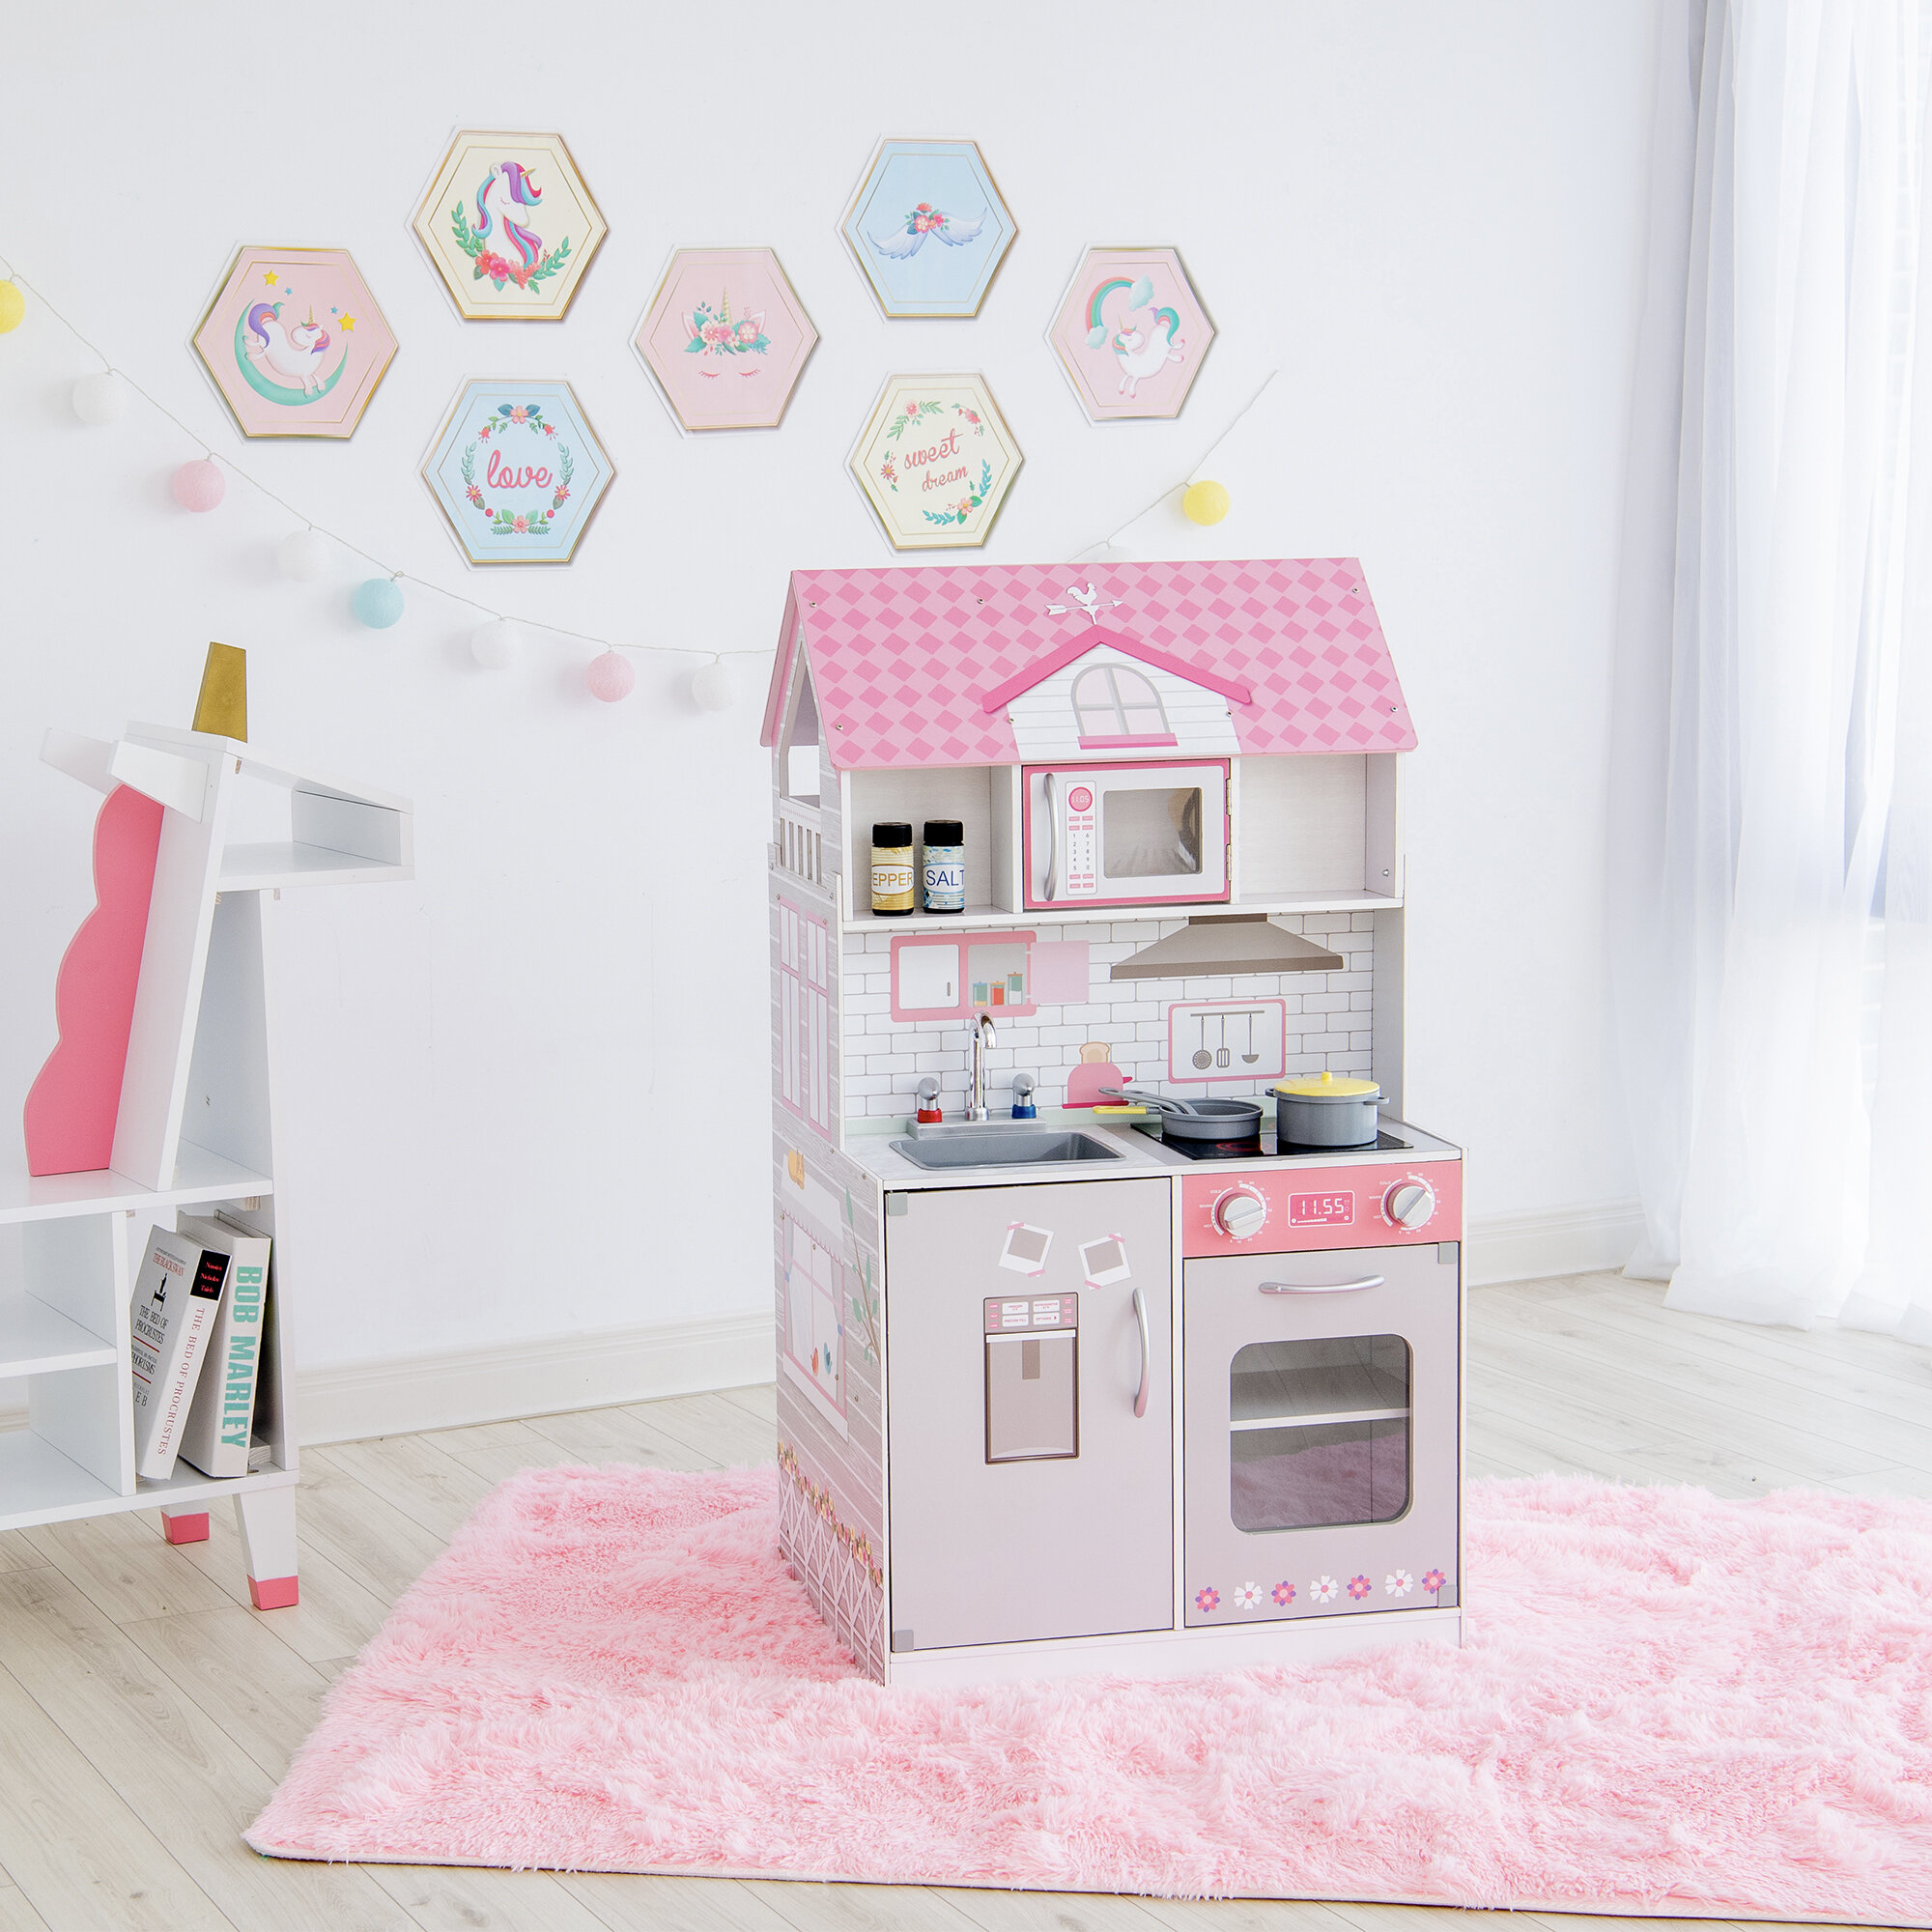 Olivia's Little World 2-in-1 Dolls House Play Kitchen Toy Kitchen With